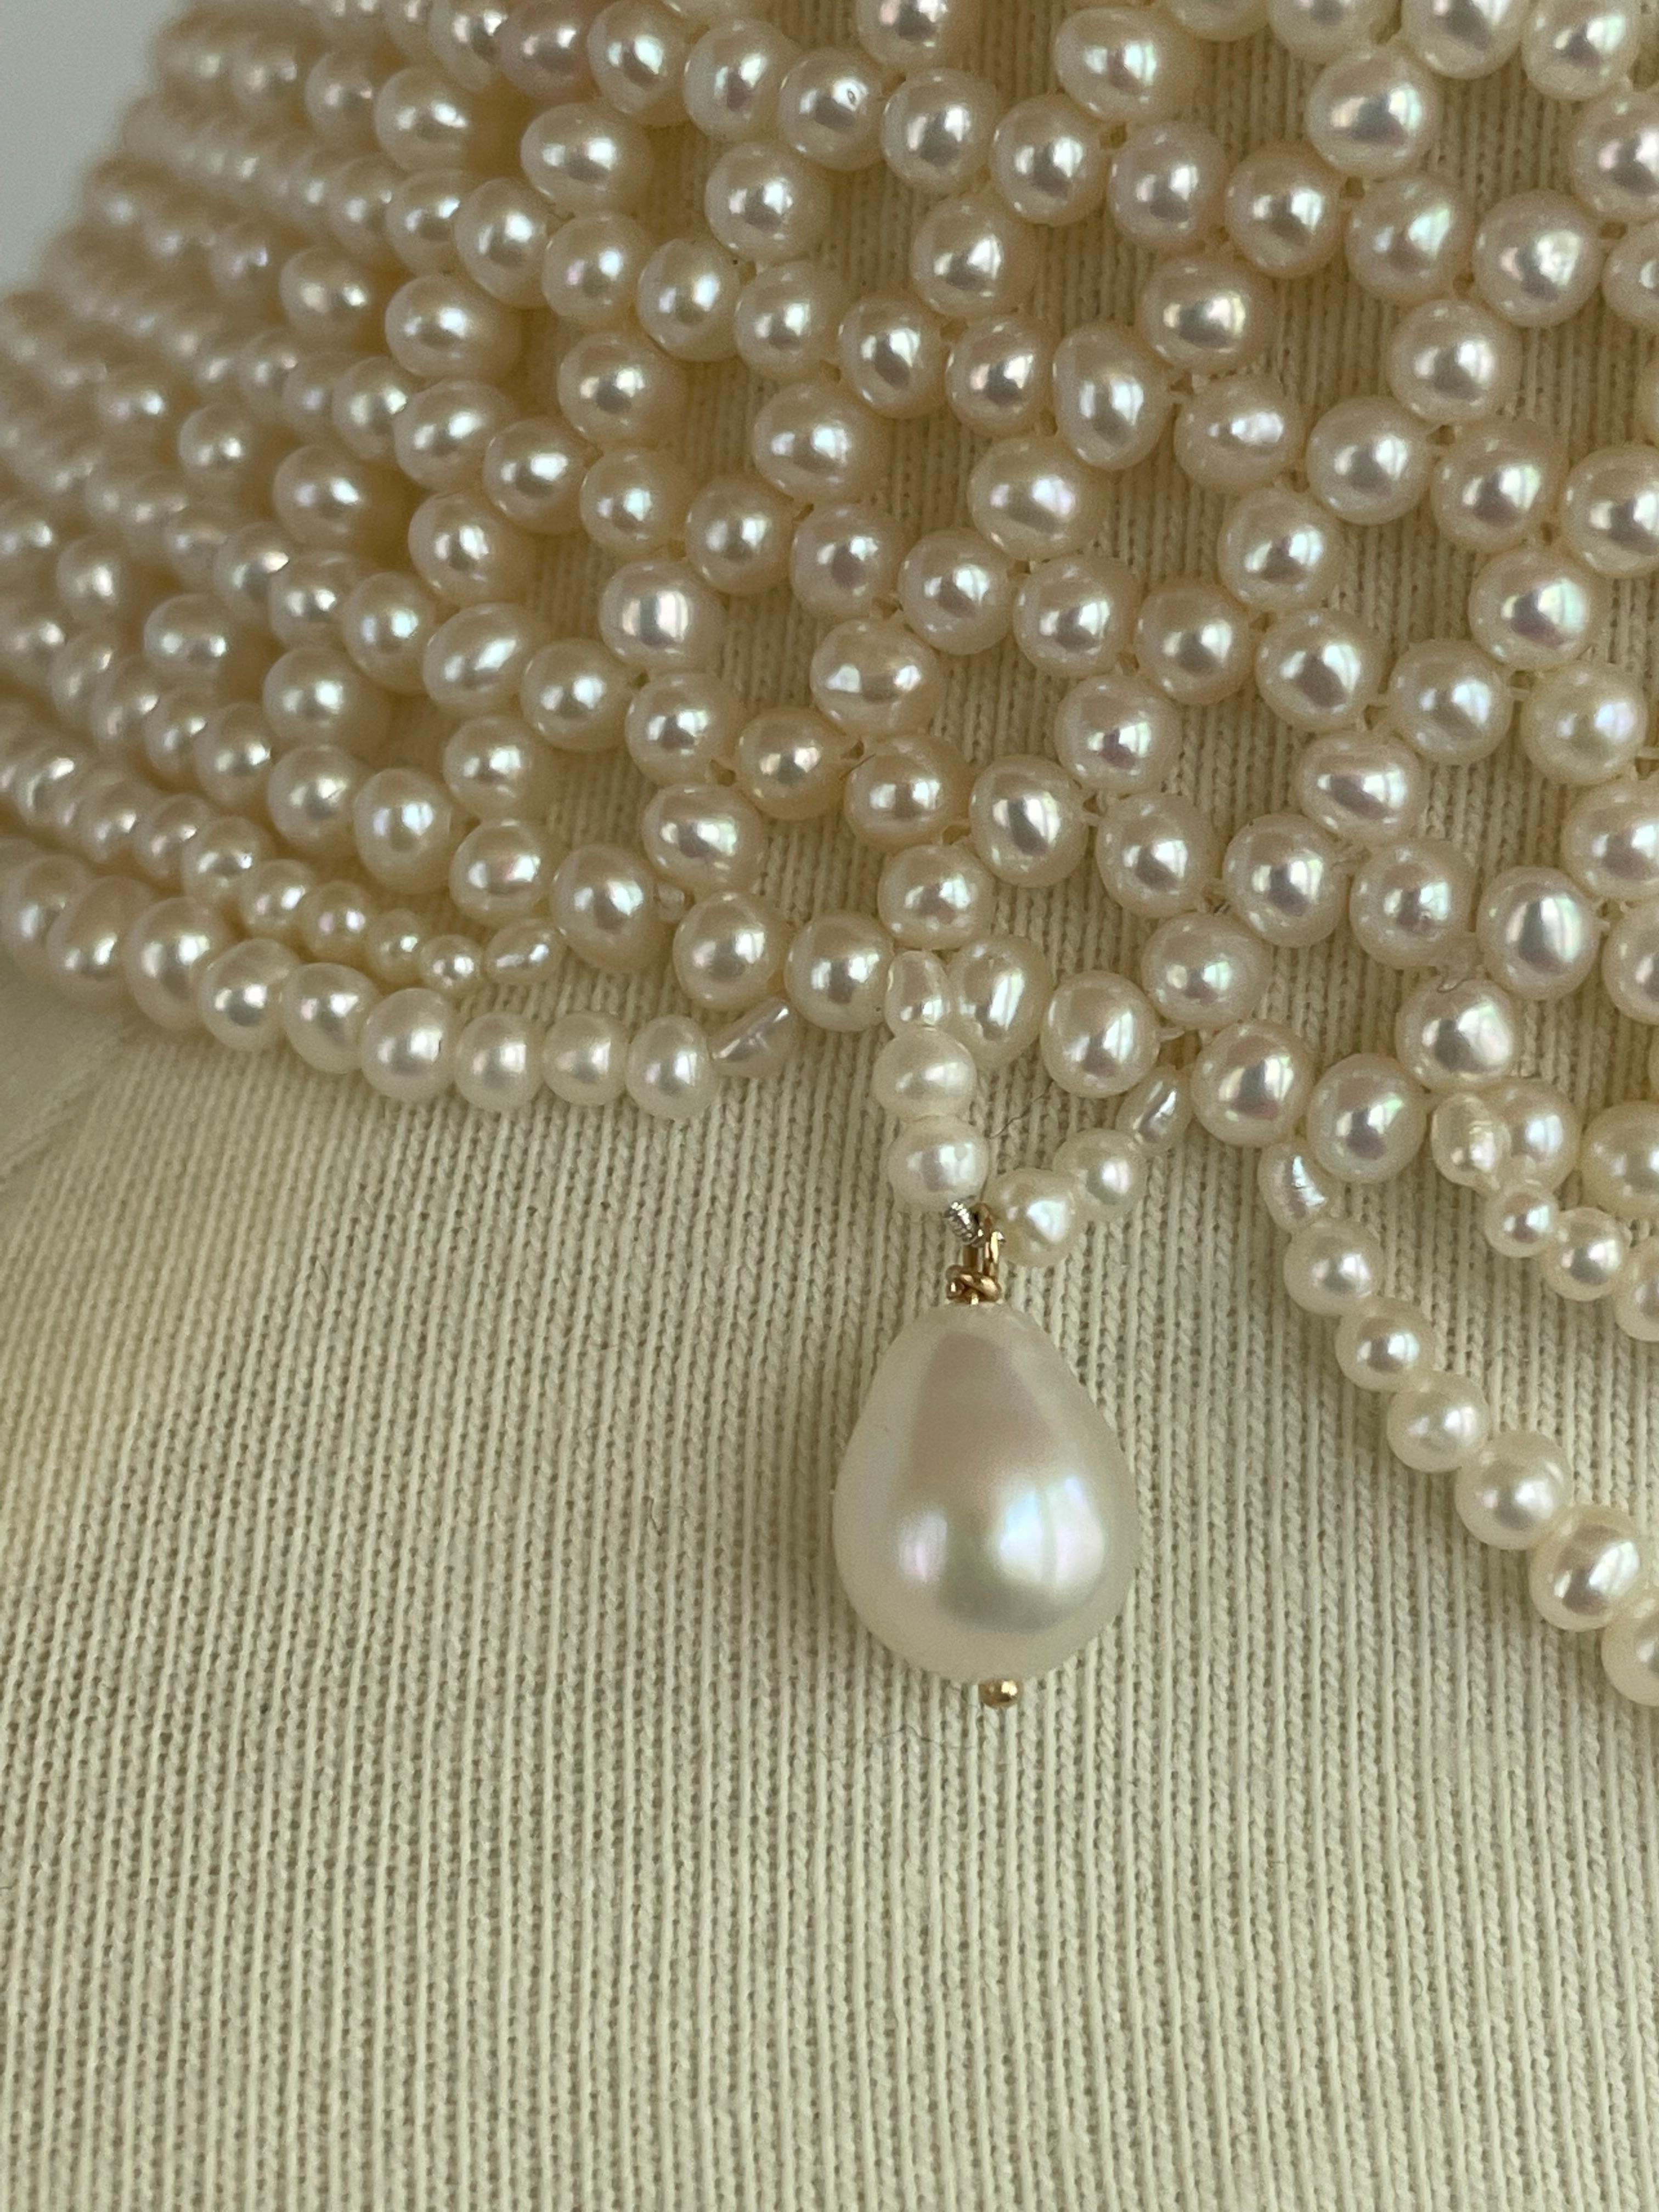 Bead Marina J. Woven Pearl Draped Choker with Pearl Drops and Secure Sliding Clasp